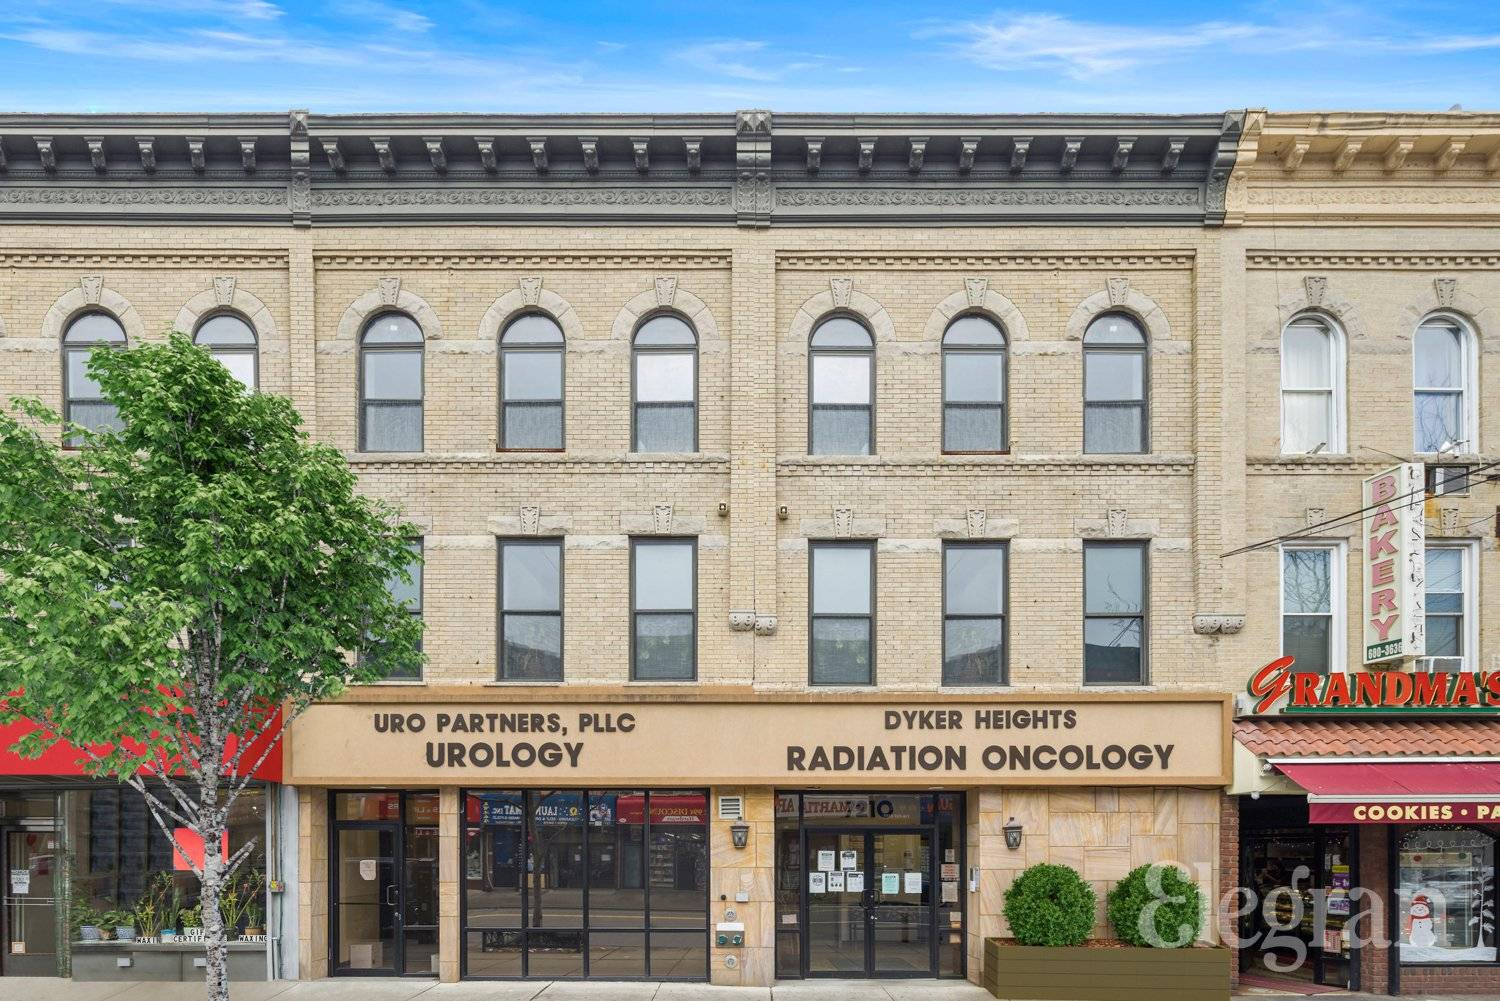 Rarely available, this thriving medical building is located on vibrant 13th Avenue between 72nd and 73rd Street in the Dyker Heights section of Brooklyn.